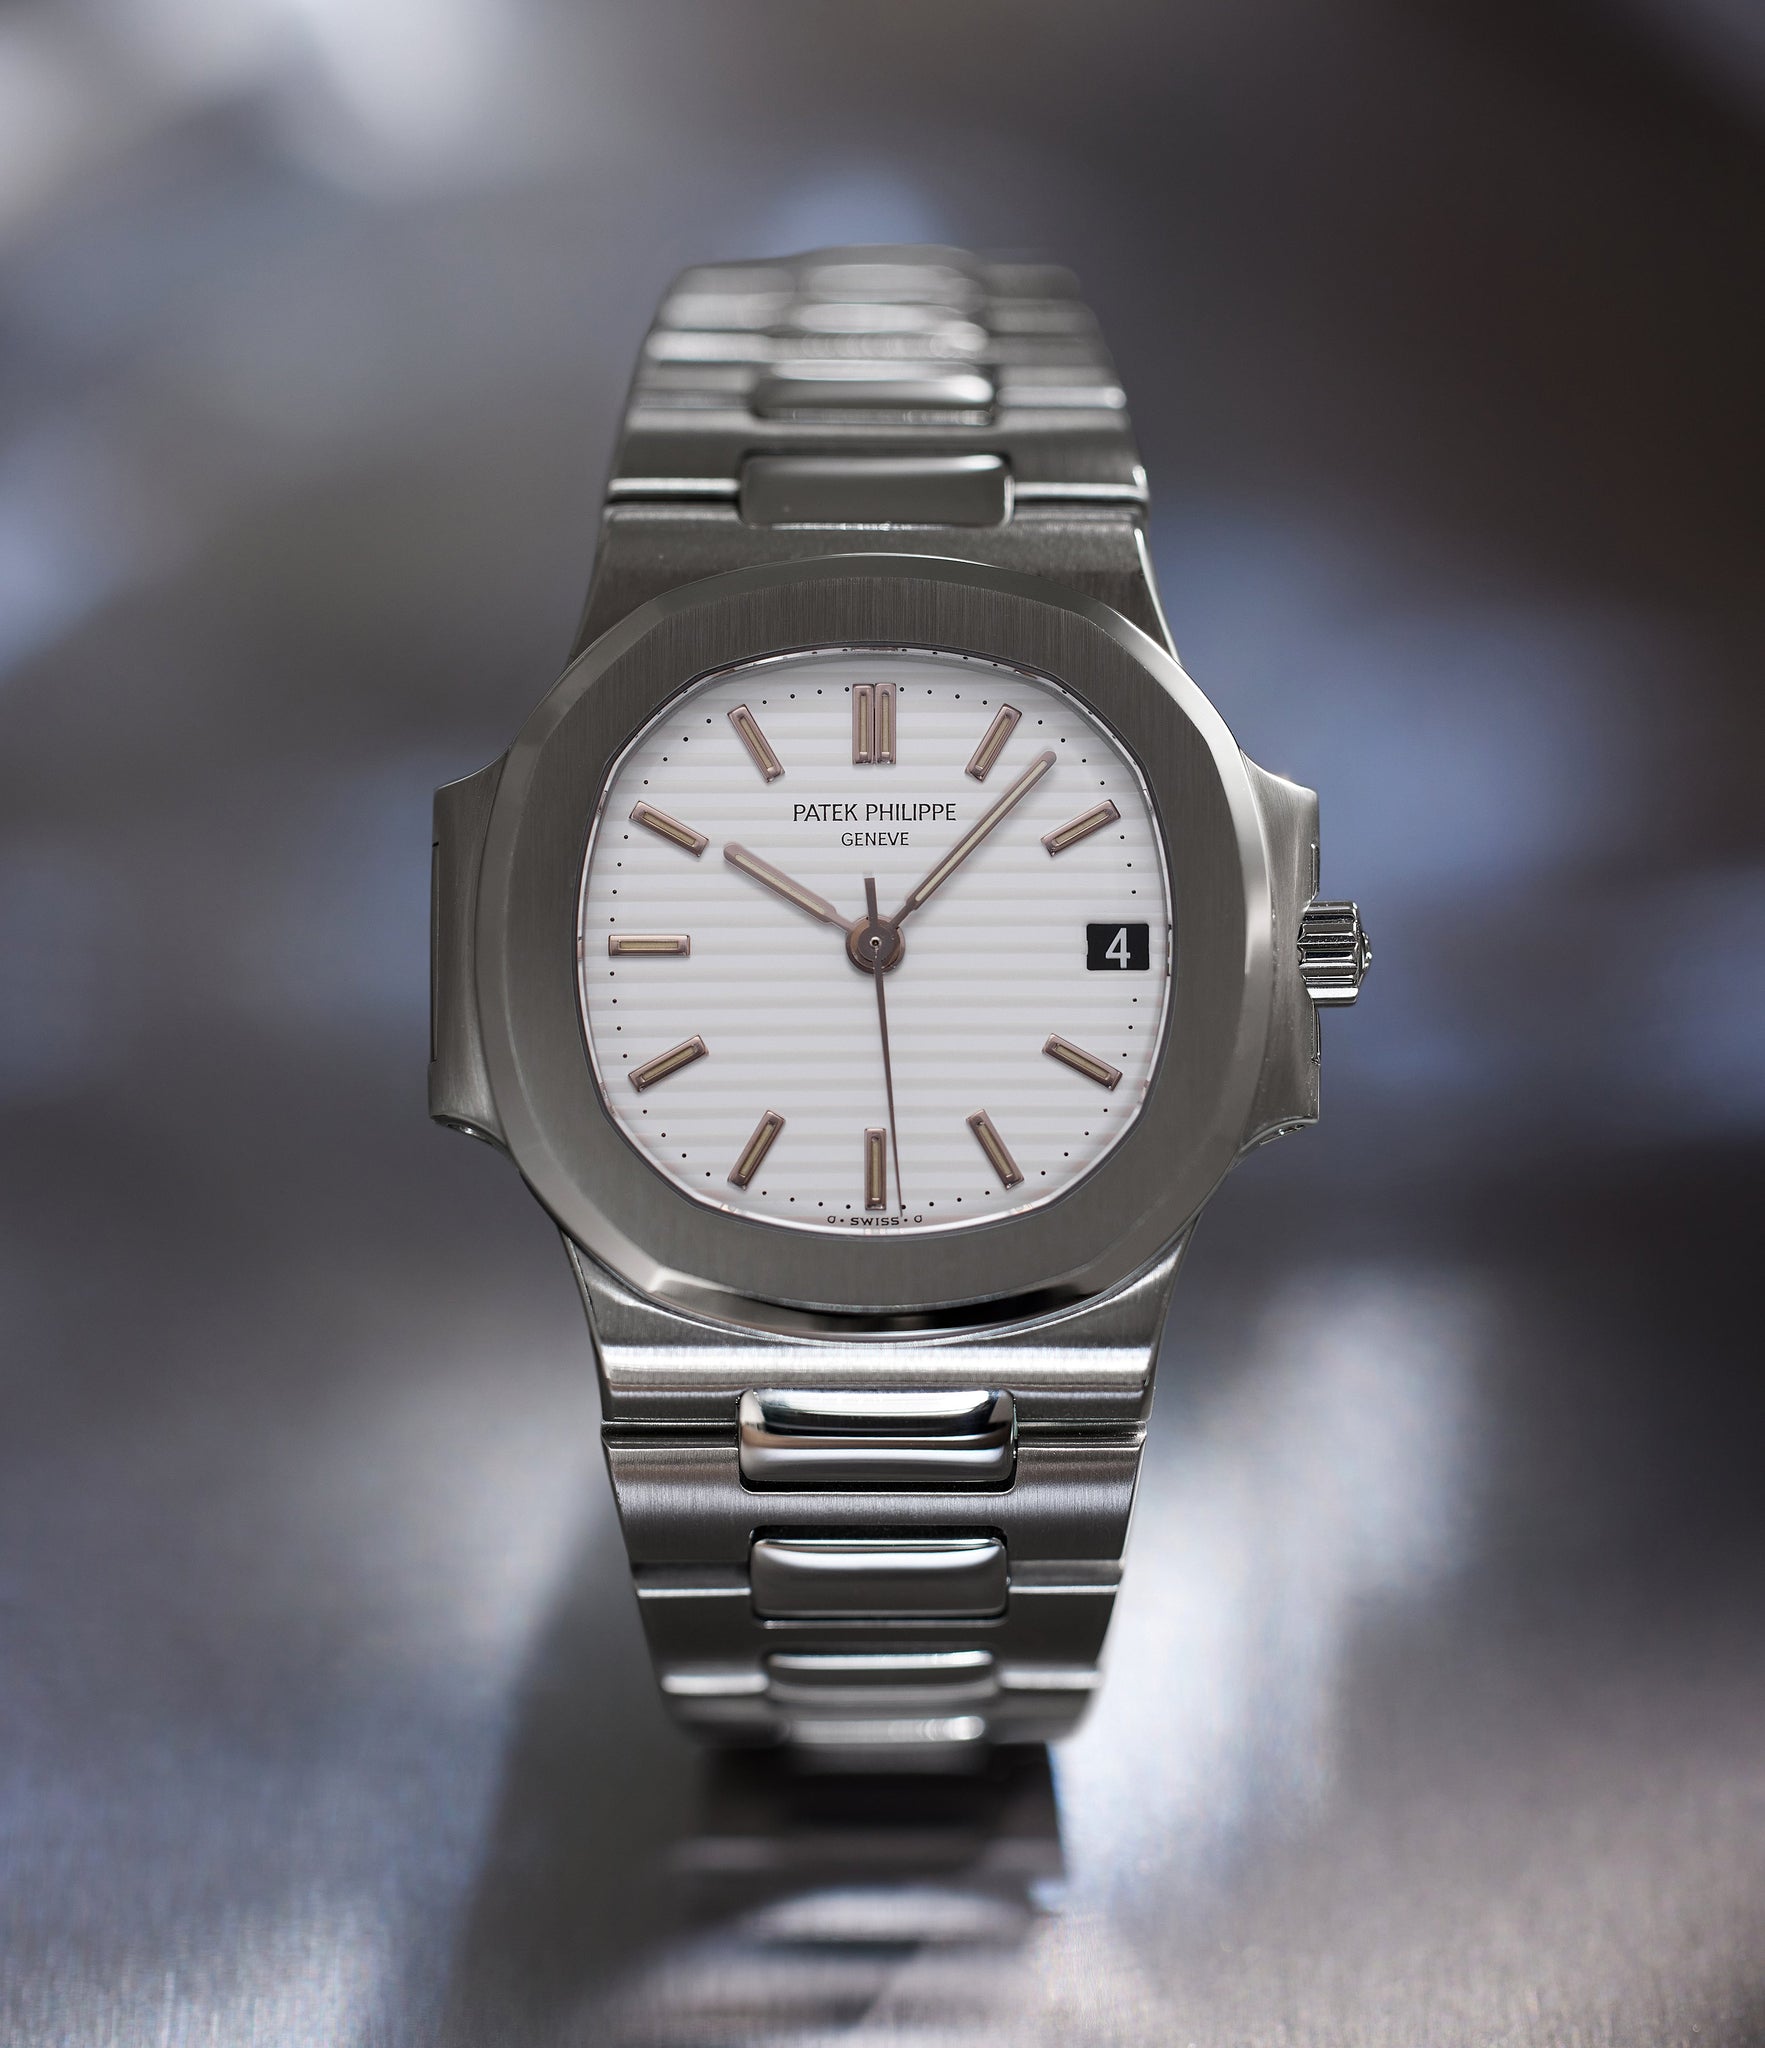 Nautilus 3800A Patek Philippe Stainless Steel preowned watch at A Collected Man London